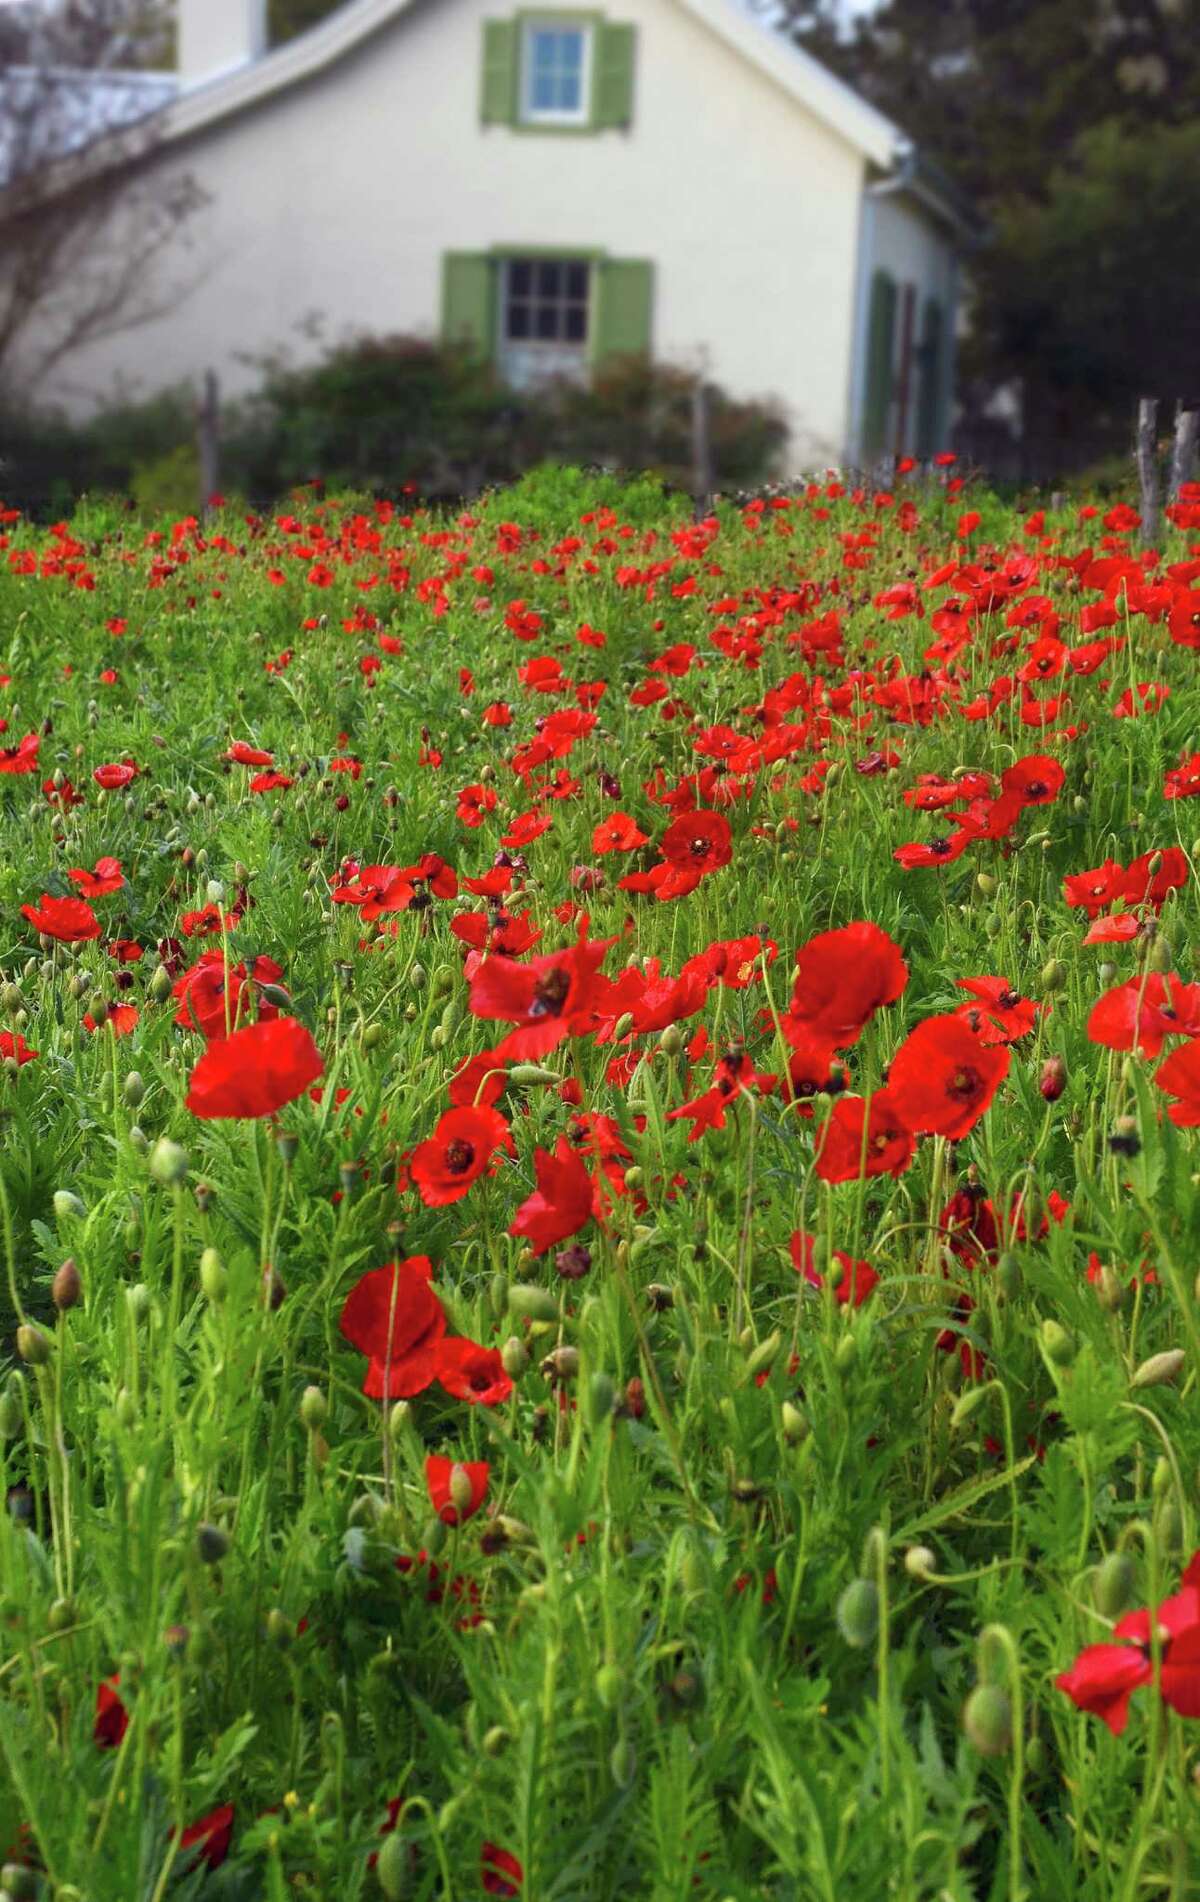 Poppies are blooming along Florence Street in Castroville. Castro Garden Club member Priscilla Garrett said the show promises to be the the best it's been in two or three years, thanks to well-timed rainfall.